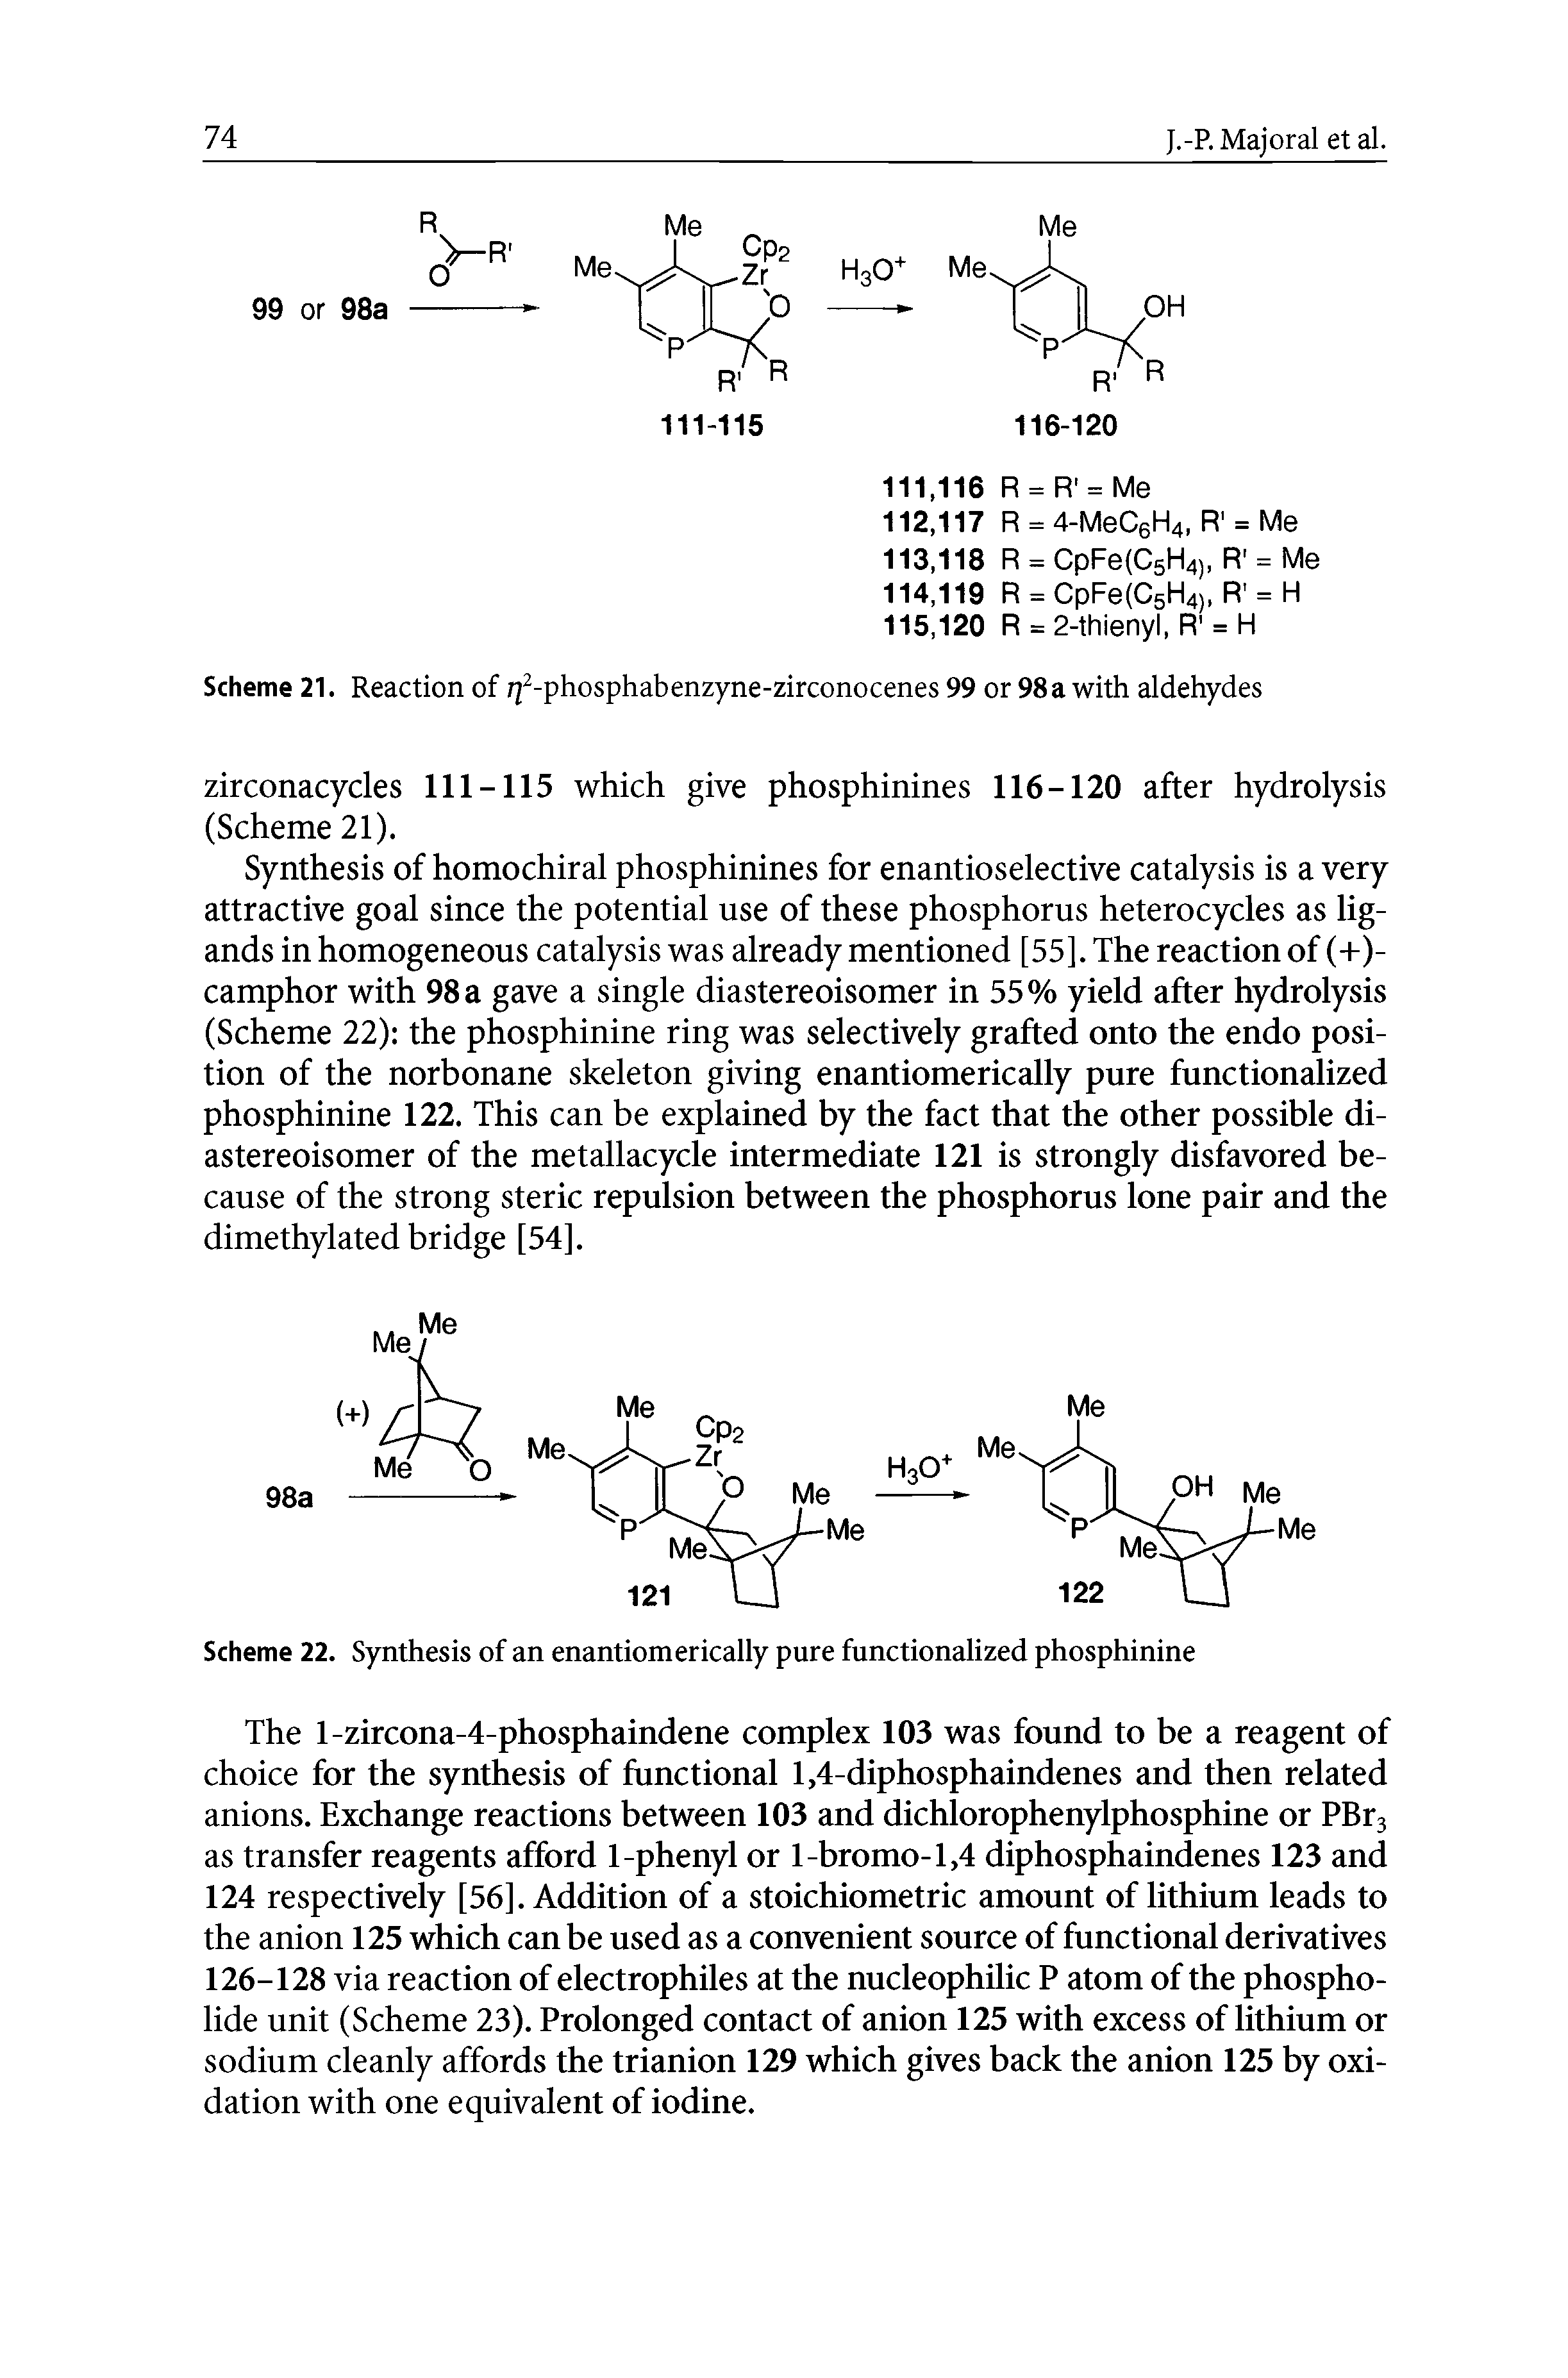 Scheme 22. Synthesis of an enantiomerically pure functionalized phosphinine...